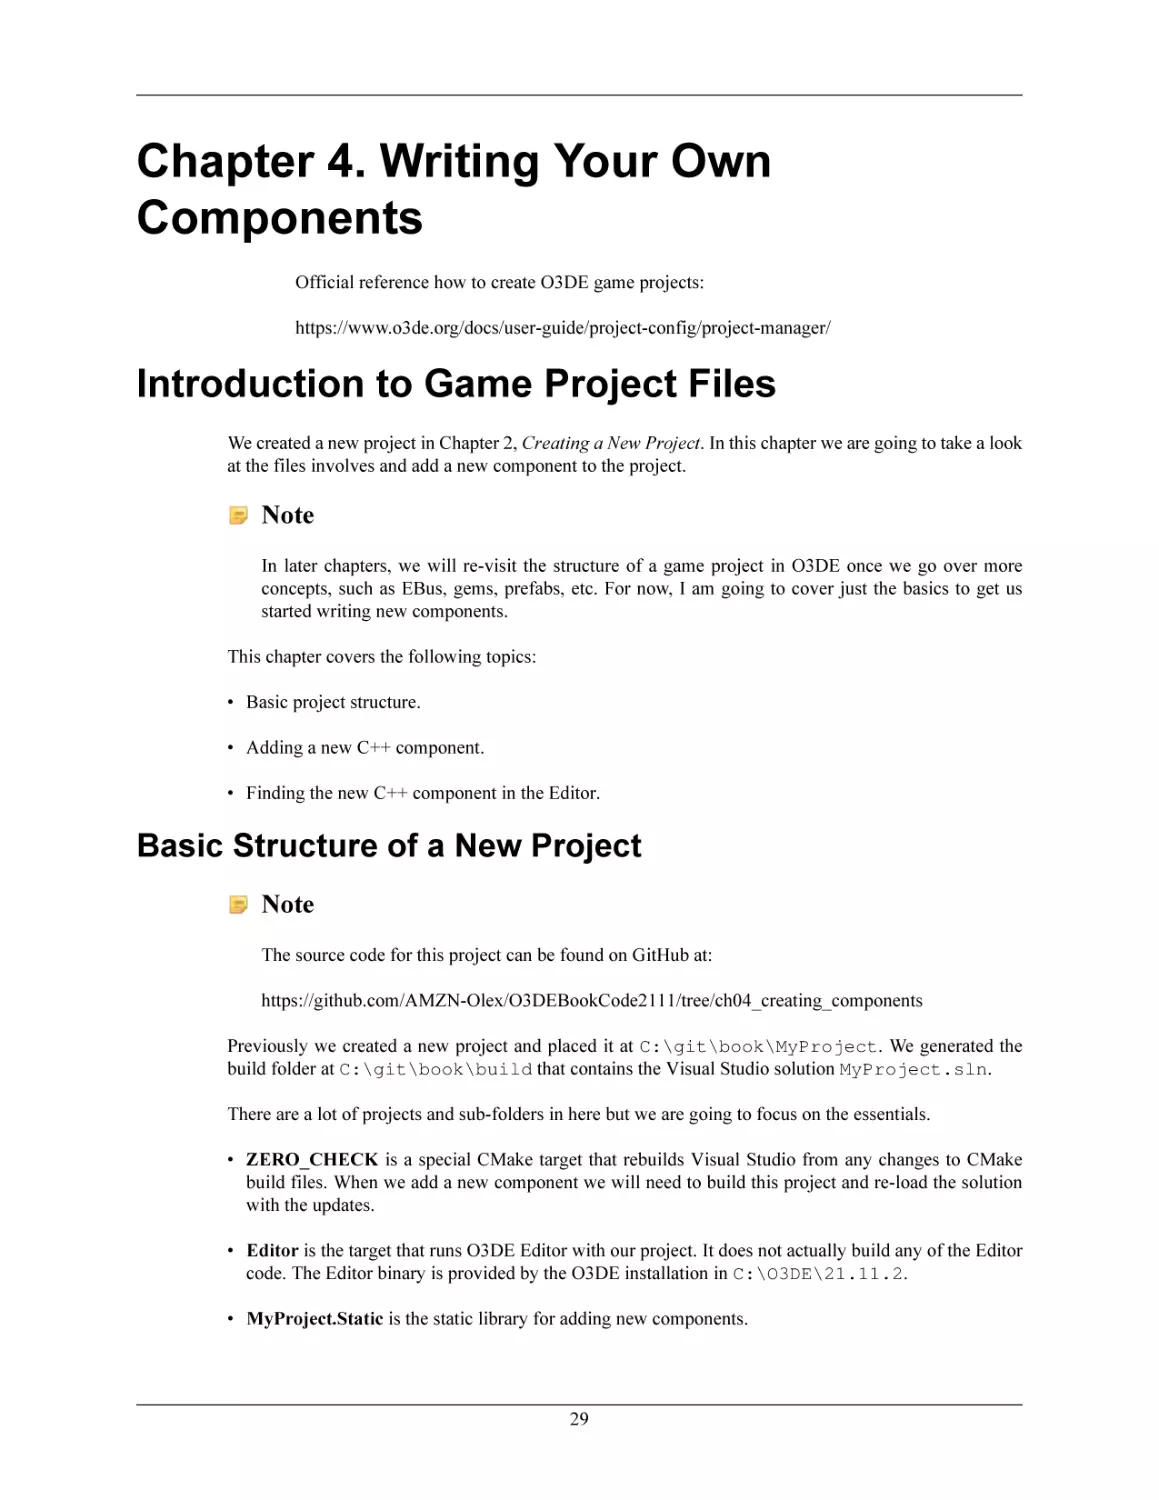 Chapter 4. Writing Your Own Components
Introduction to Game Project Files
Basic Structure of a New Project